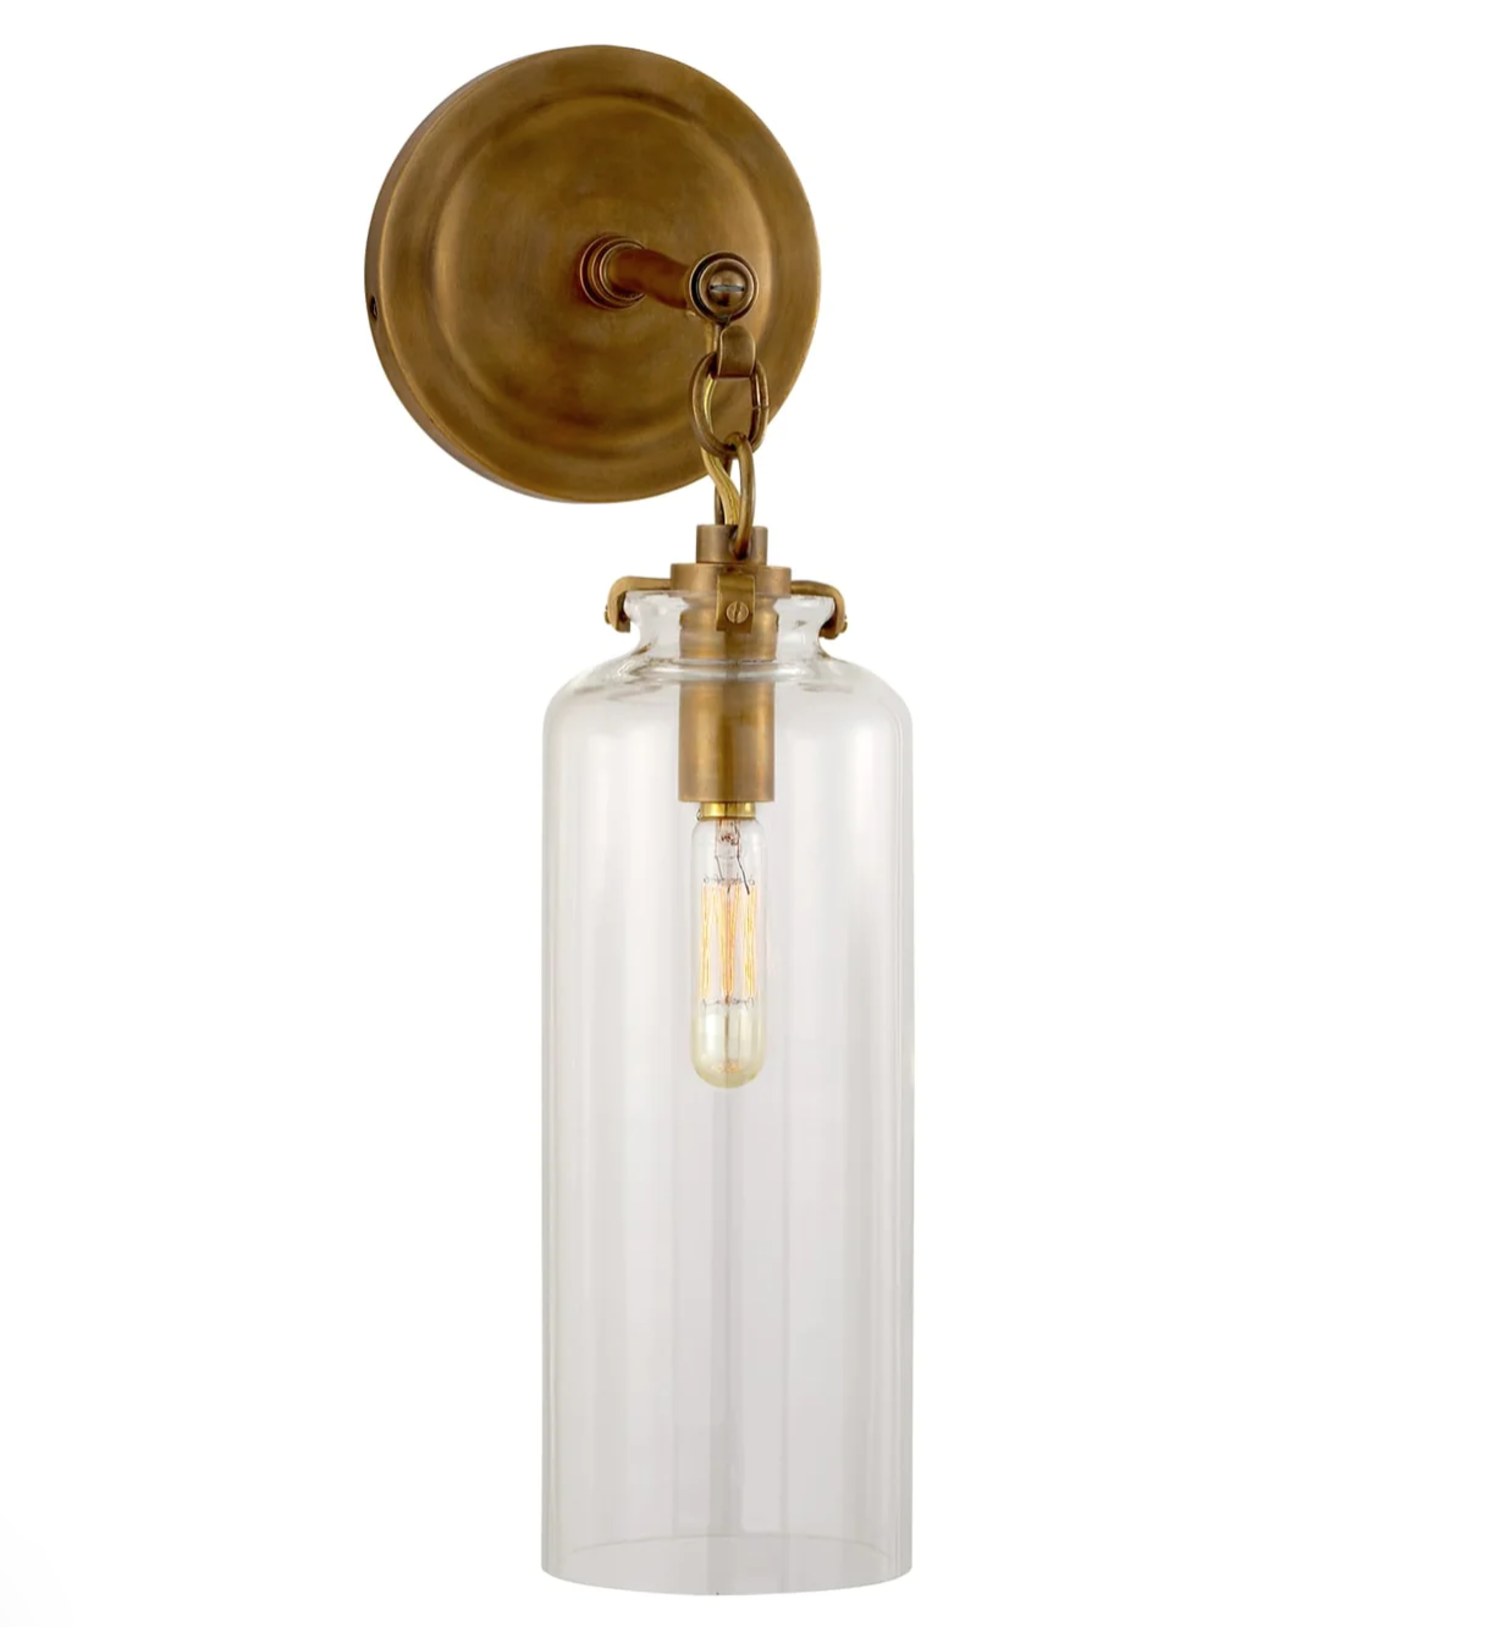 Visual Comfort brass sconce // Classic swing arm sconce in brass